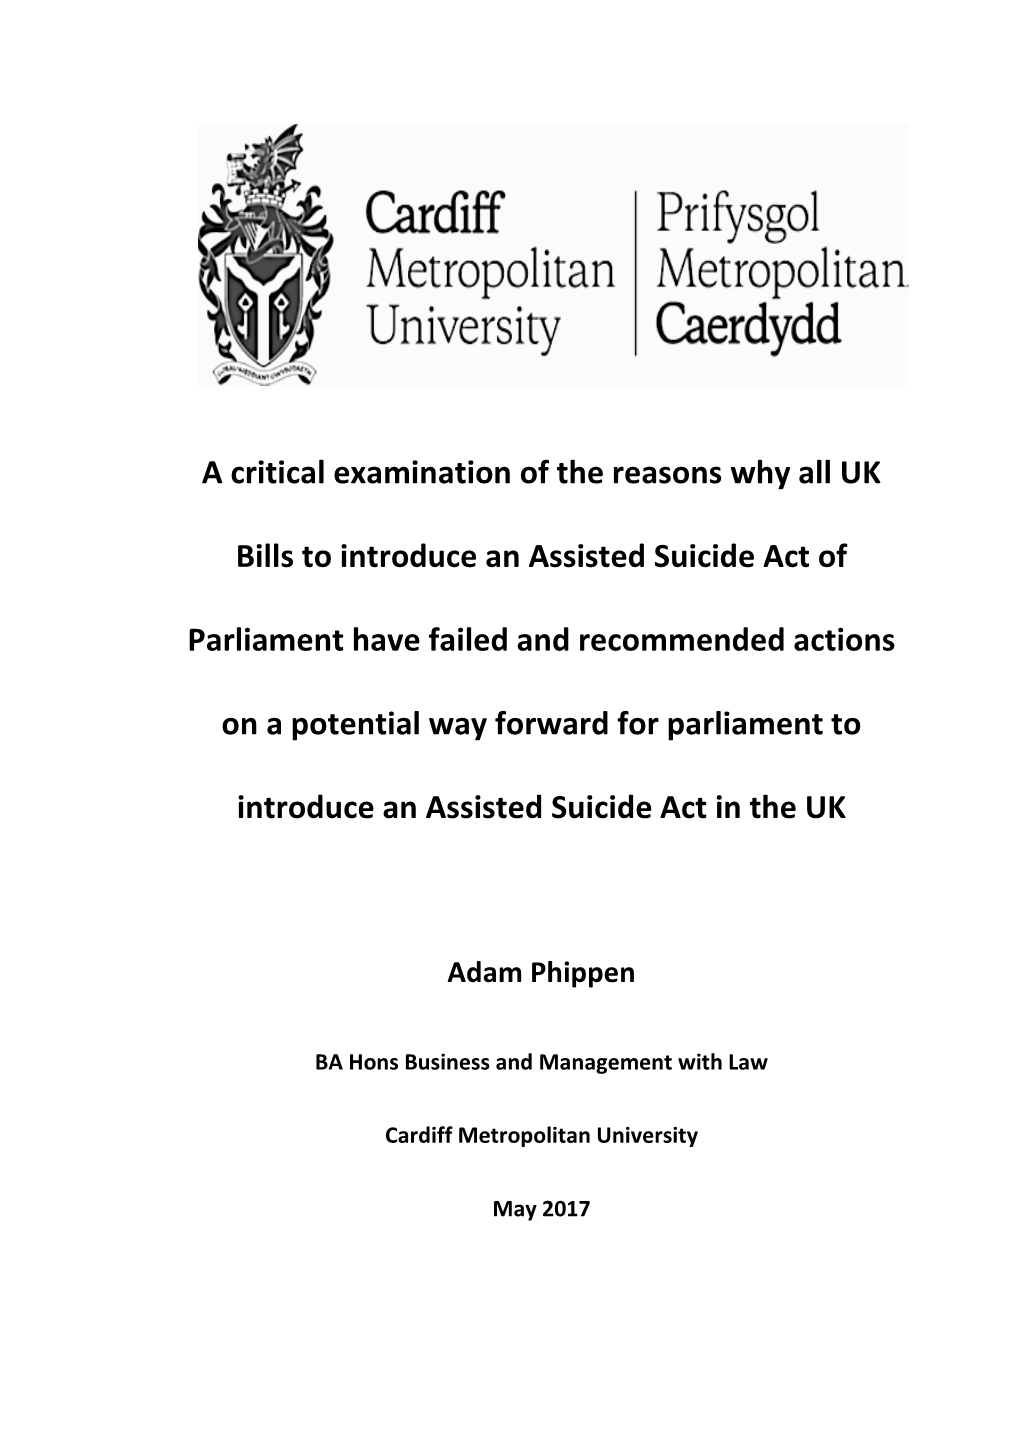 A Critical Examination of the Reasons Why All UK Bills to Introduce An